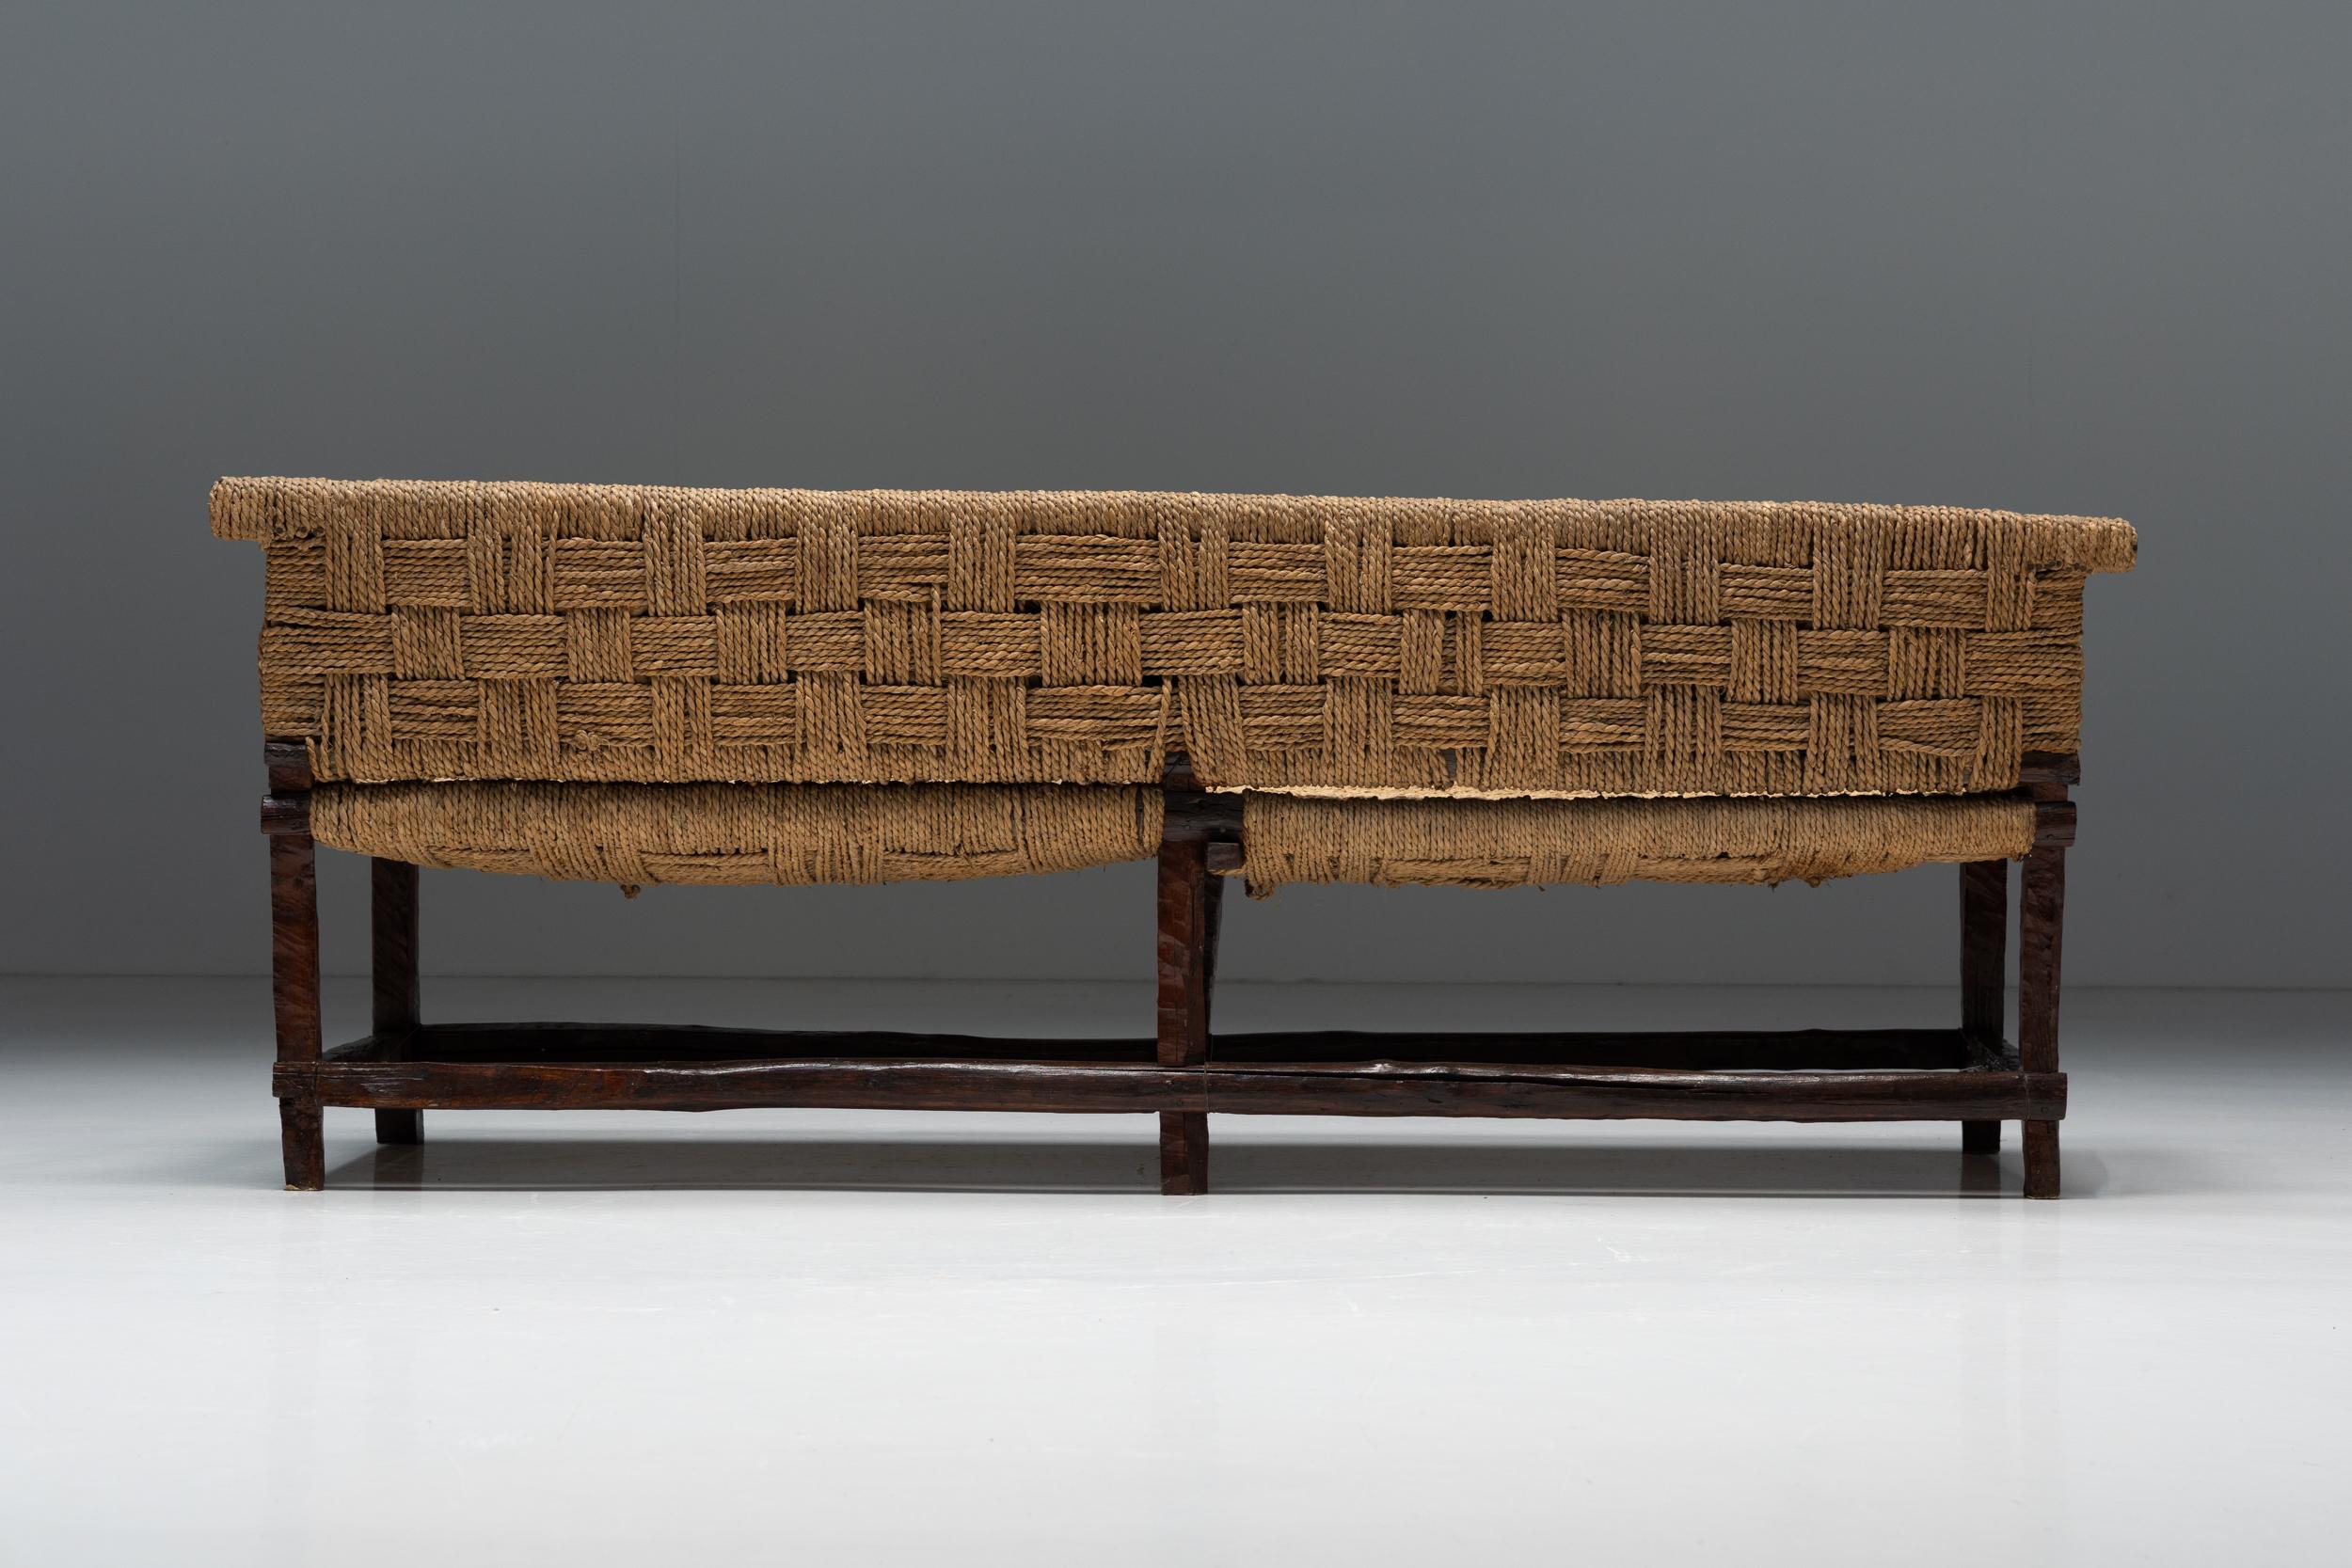 French Naive Folk Art Bench with Woven Seating, 1920s